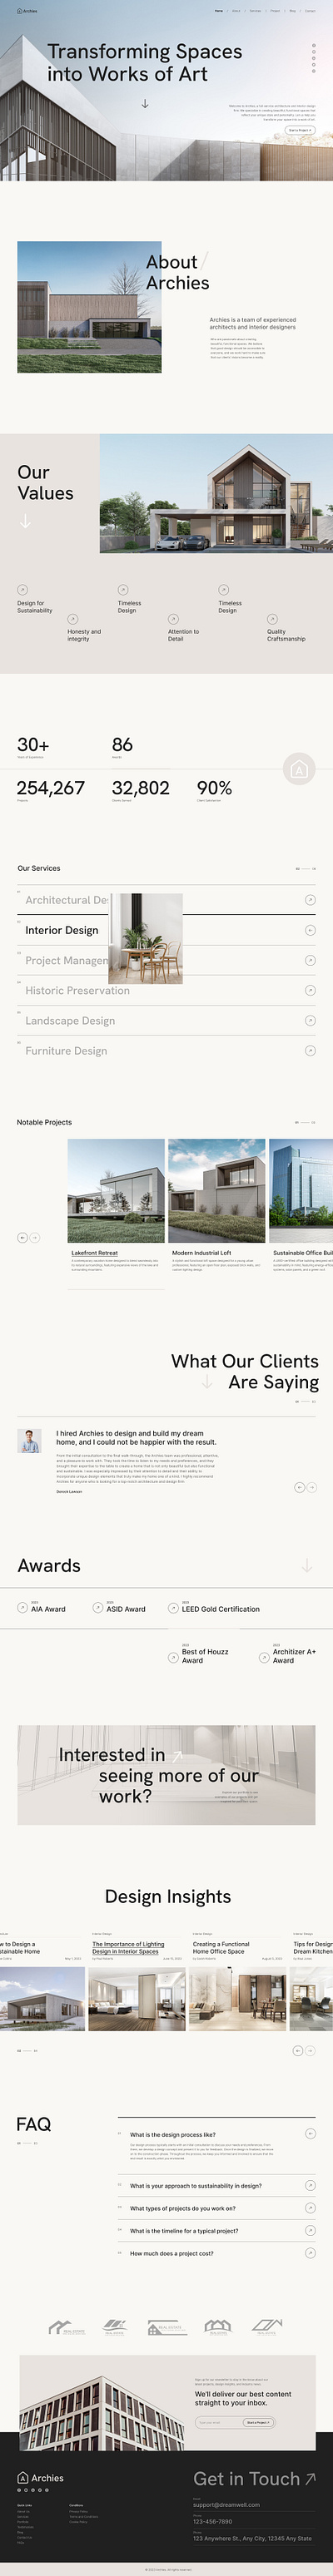 Archies - Crafting an Engaging Website for an Architecture Firm